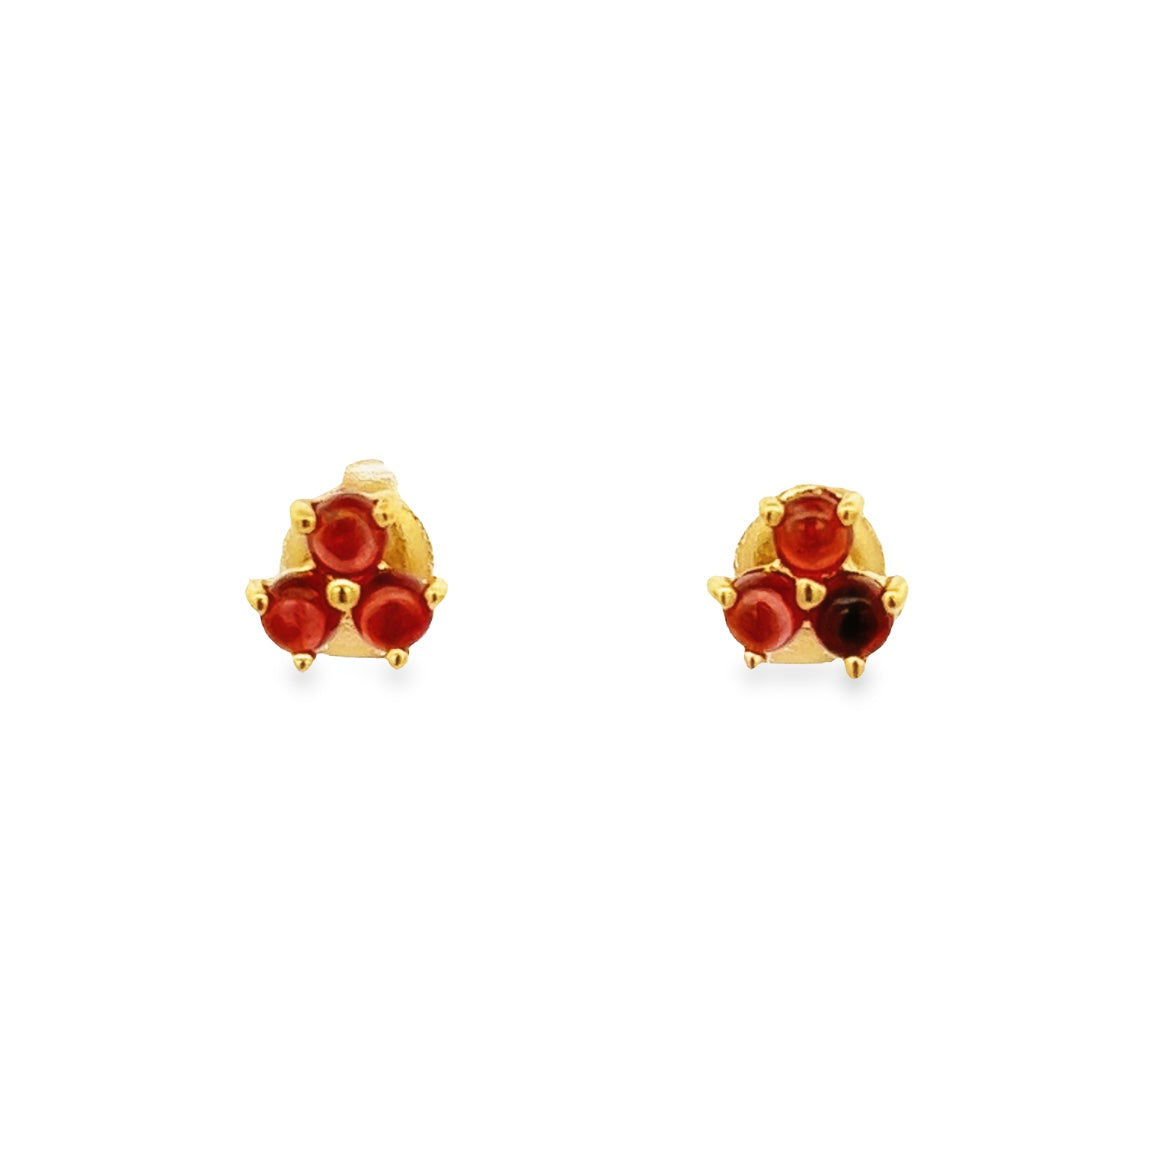 925 SIVER GOLD PLATED THREE STONE GARNET EARRINGS